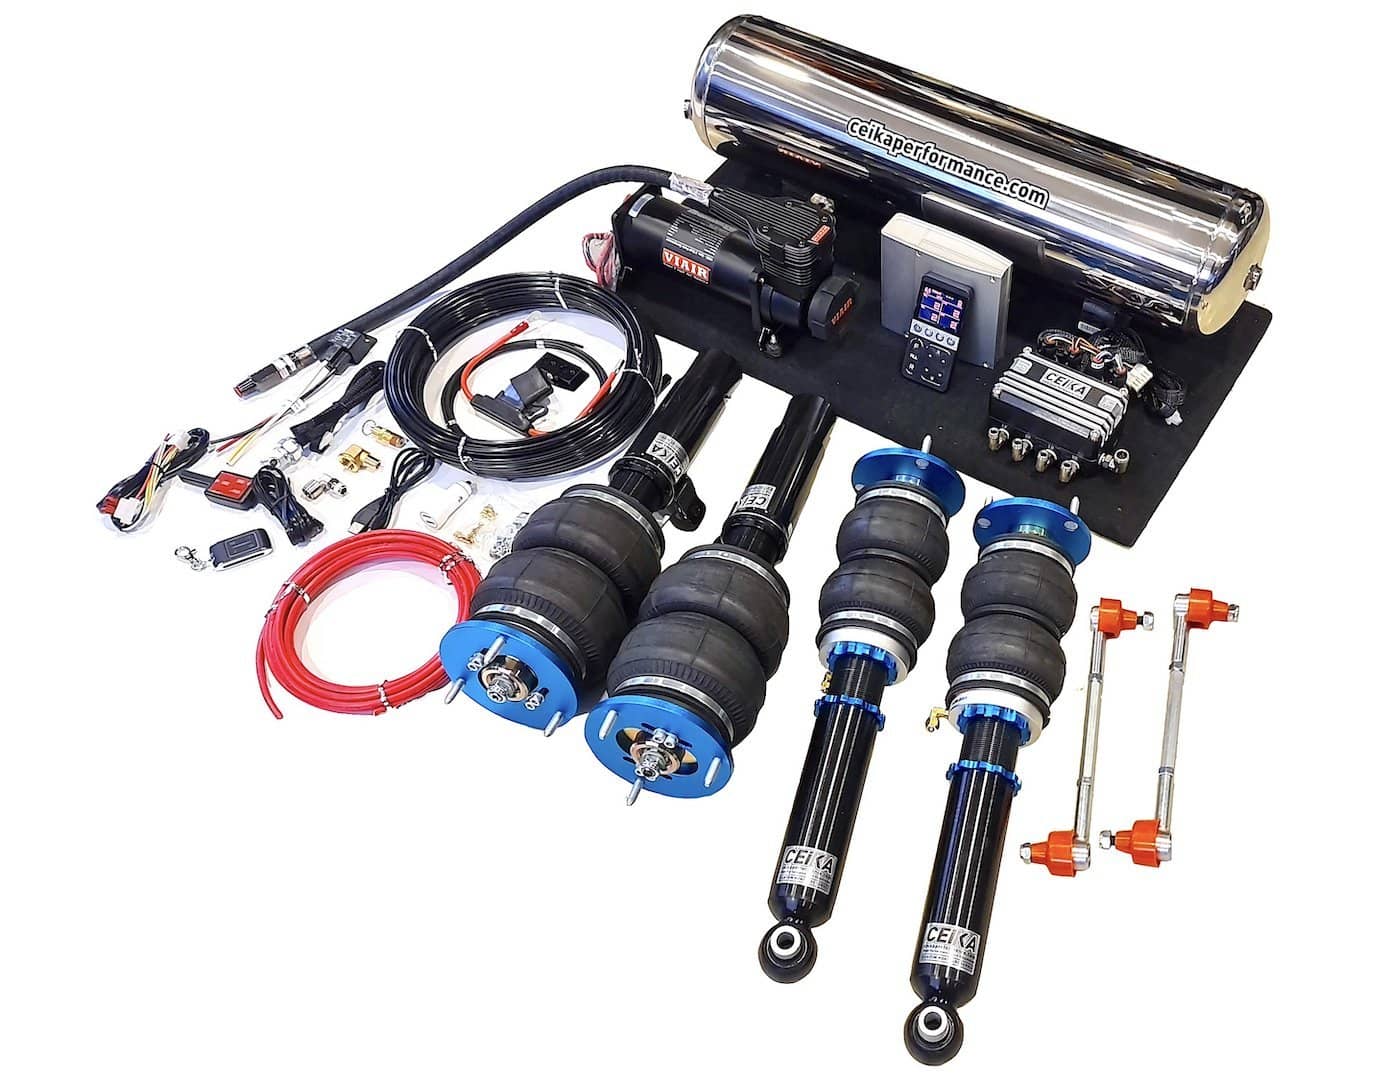 CEIKA Air Ride Coilover Kit for VOLKSWAGEN GOLF MK7 2WD φ50 (Rr Multi-Link Suspension) OE Rr
Separated (12~UP)